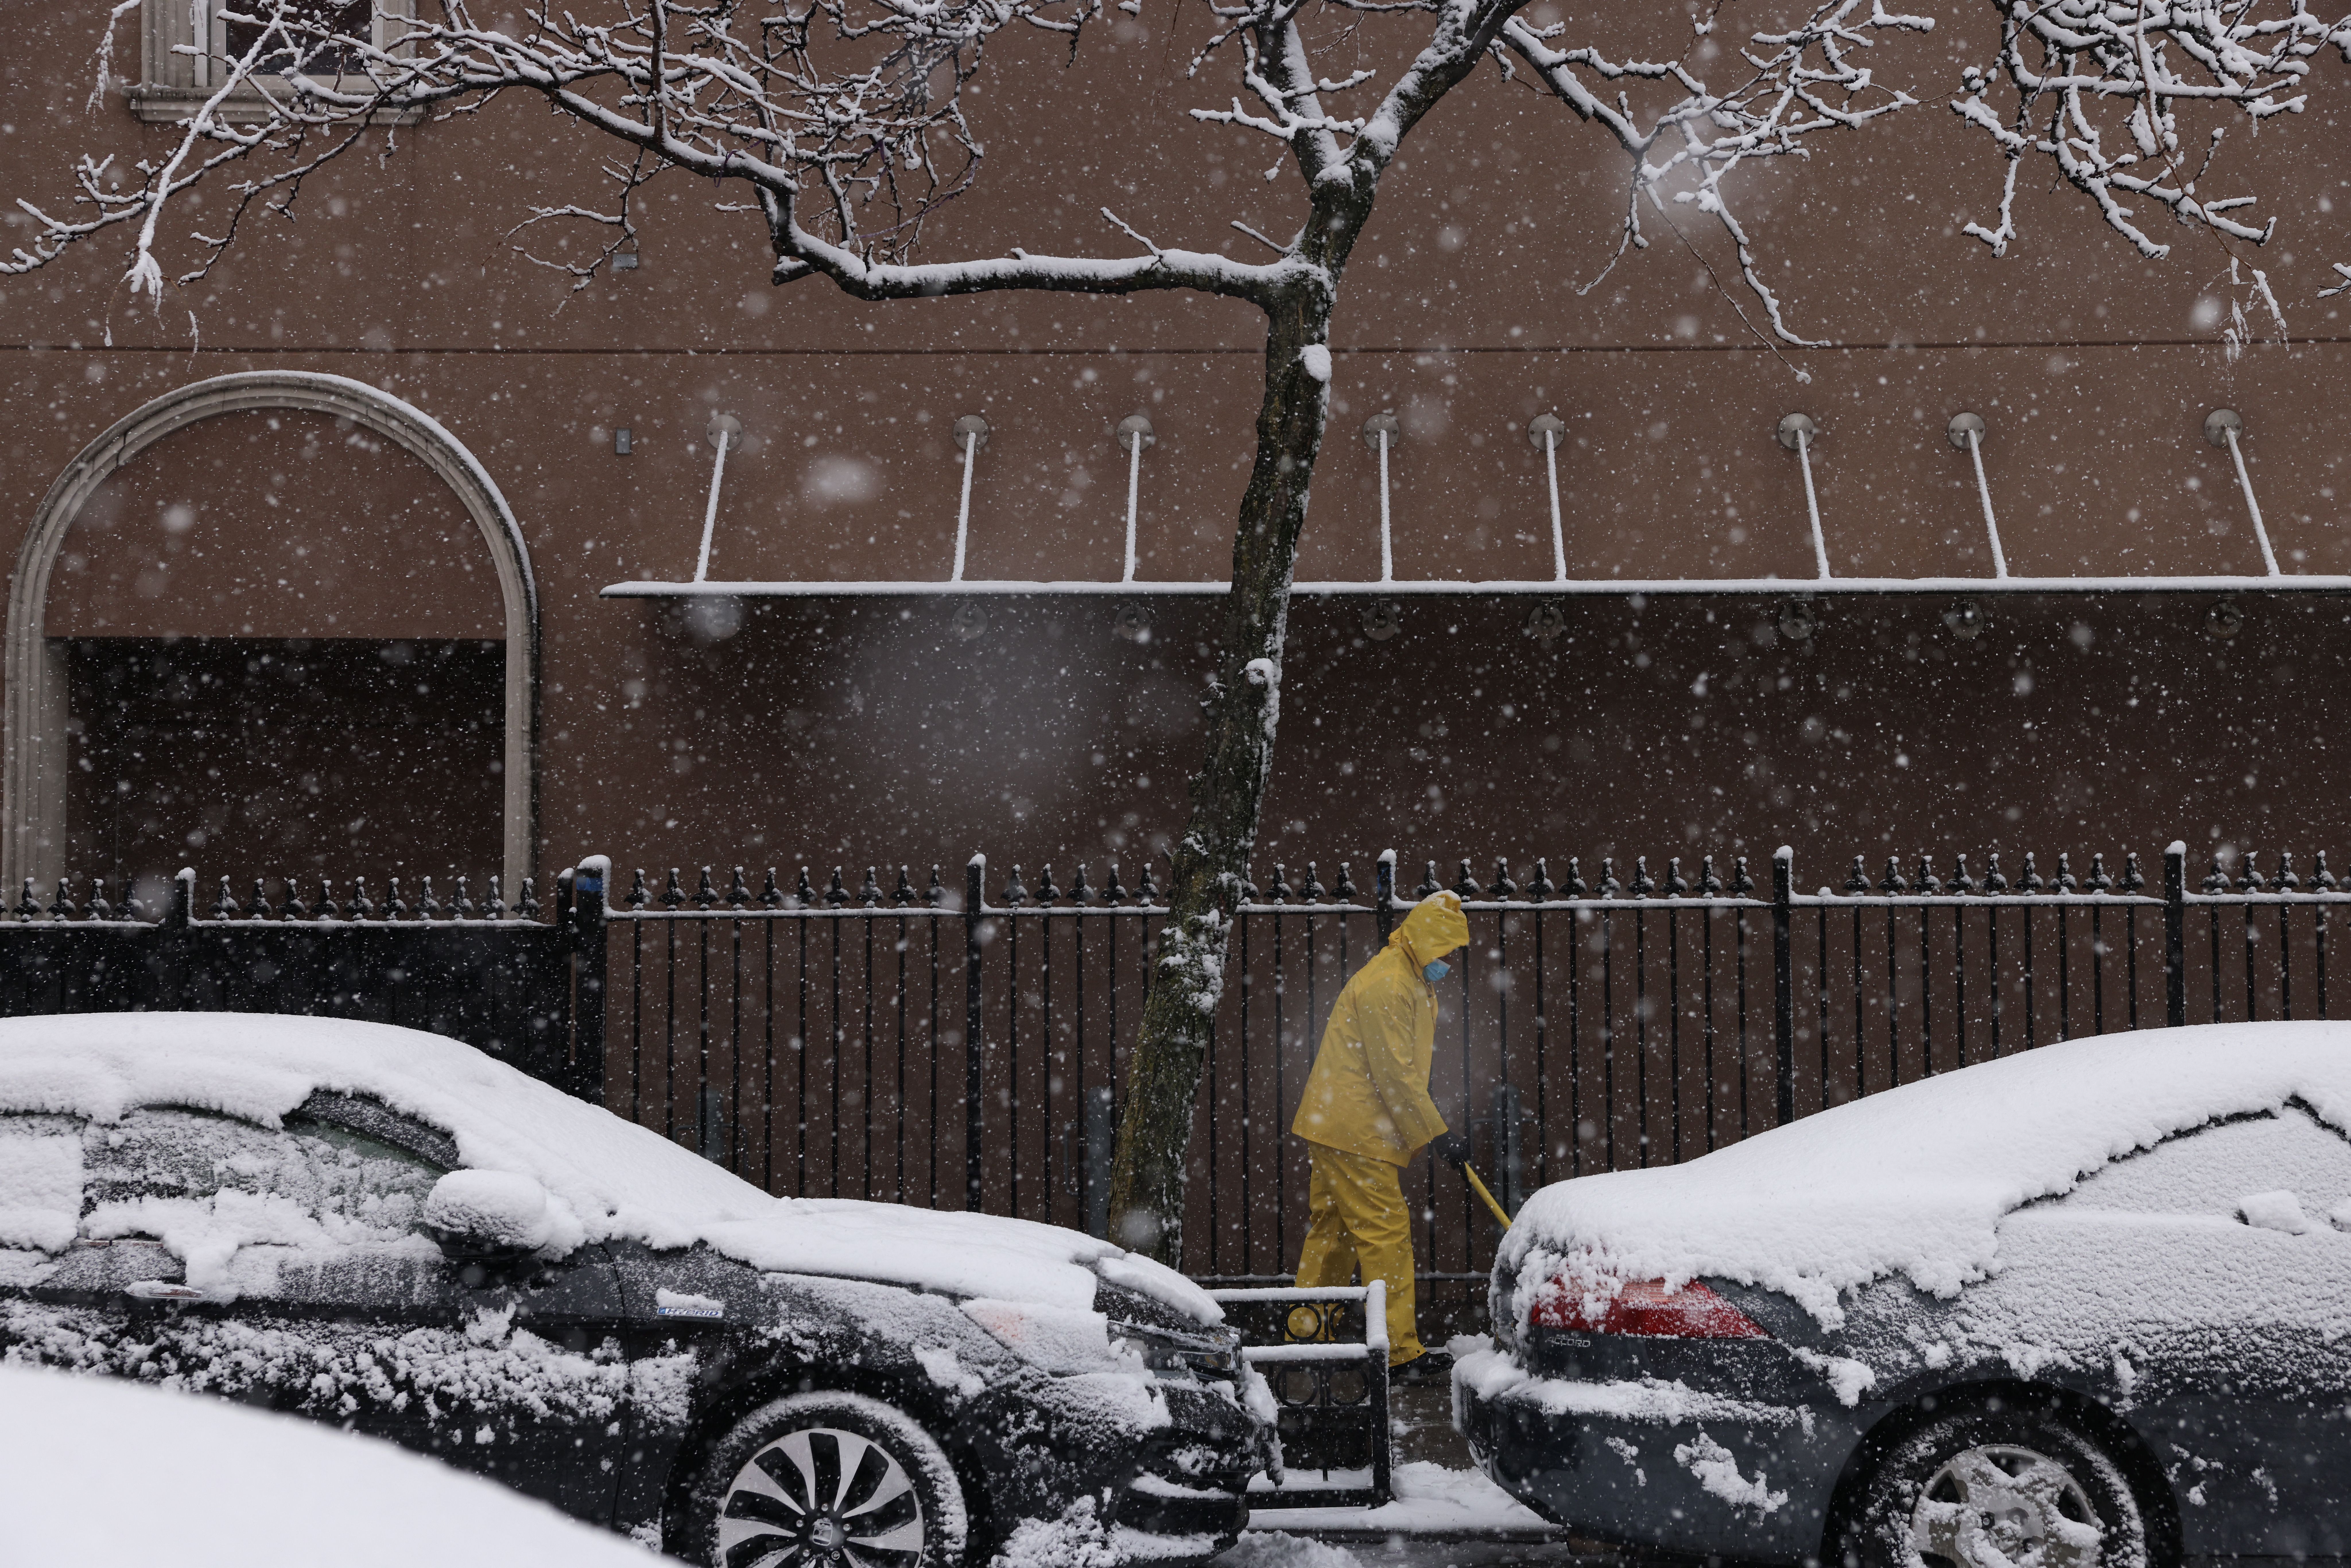  A person shovels the sidewalk as snow falls in the Brooklyn borough of New York City on February 13, 2024. Heavy snowfall is expected over parts of the Northeast US starting late February 12, with some areas getting up to two inches (5cms) of snow an hour, the National Weather Service forecasters said.